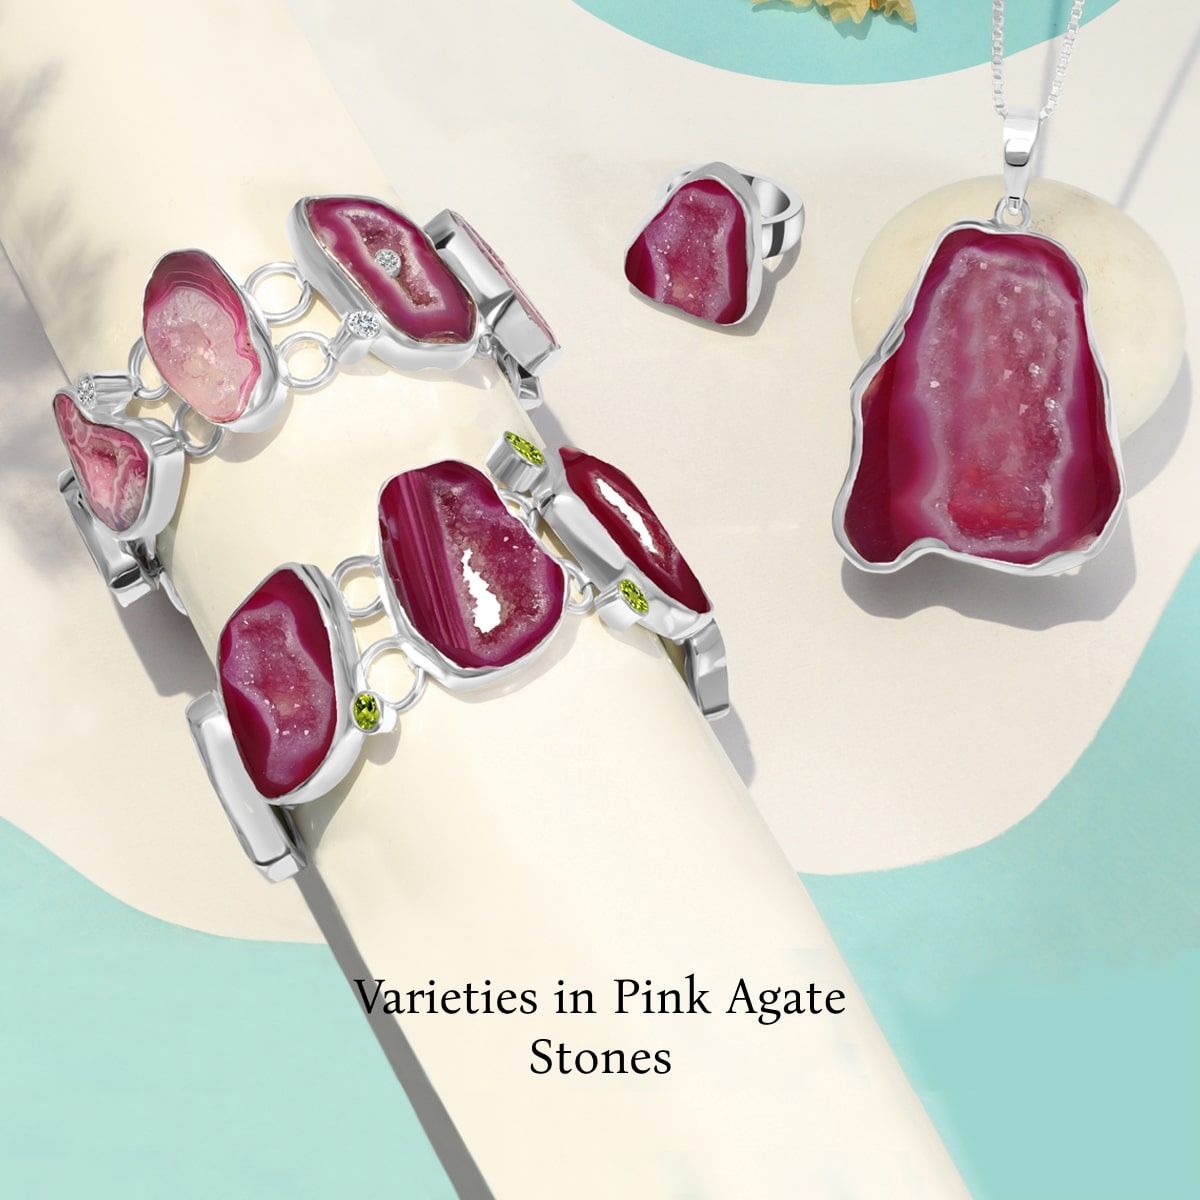 Types of pink agate